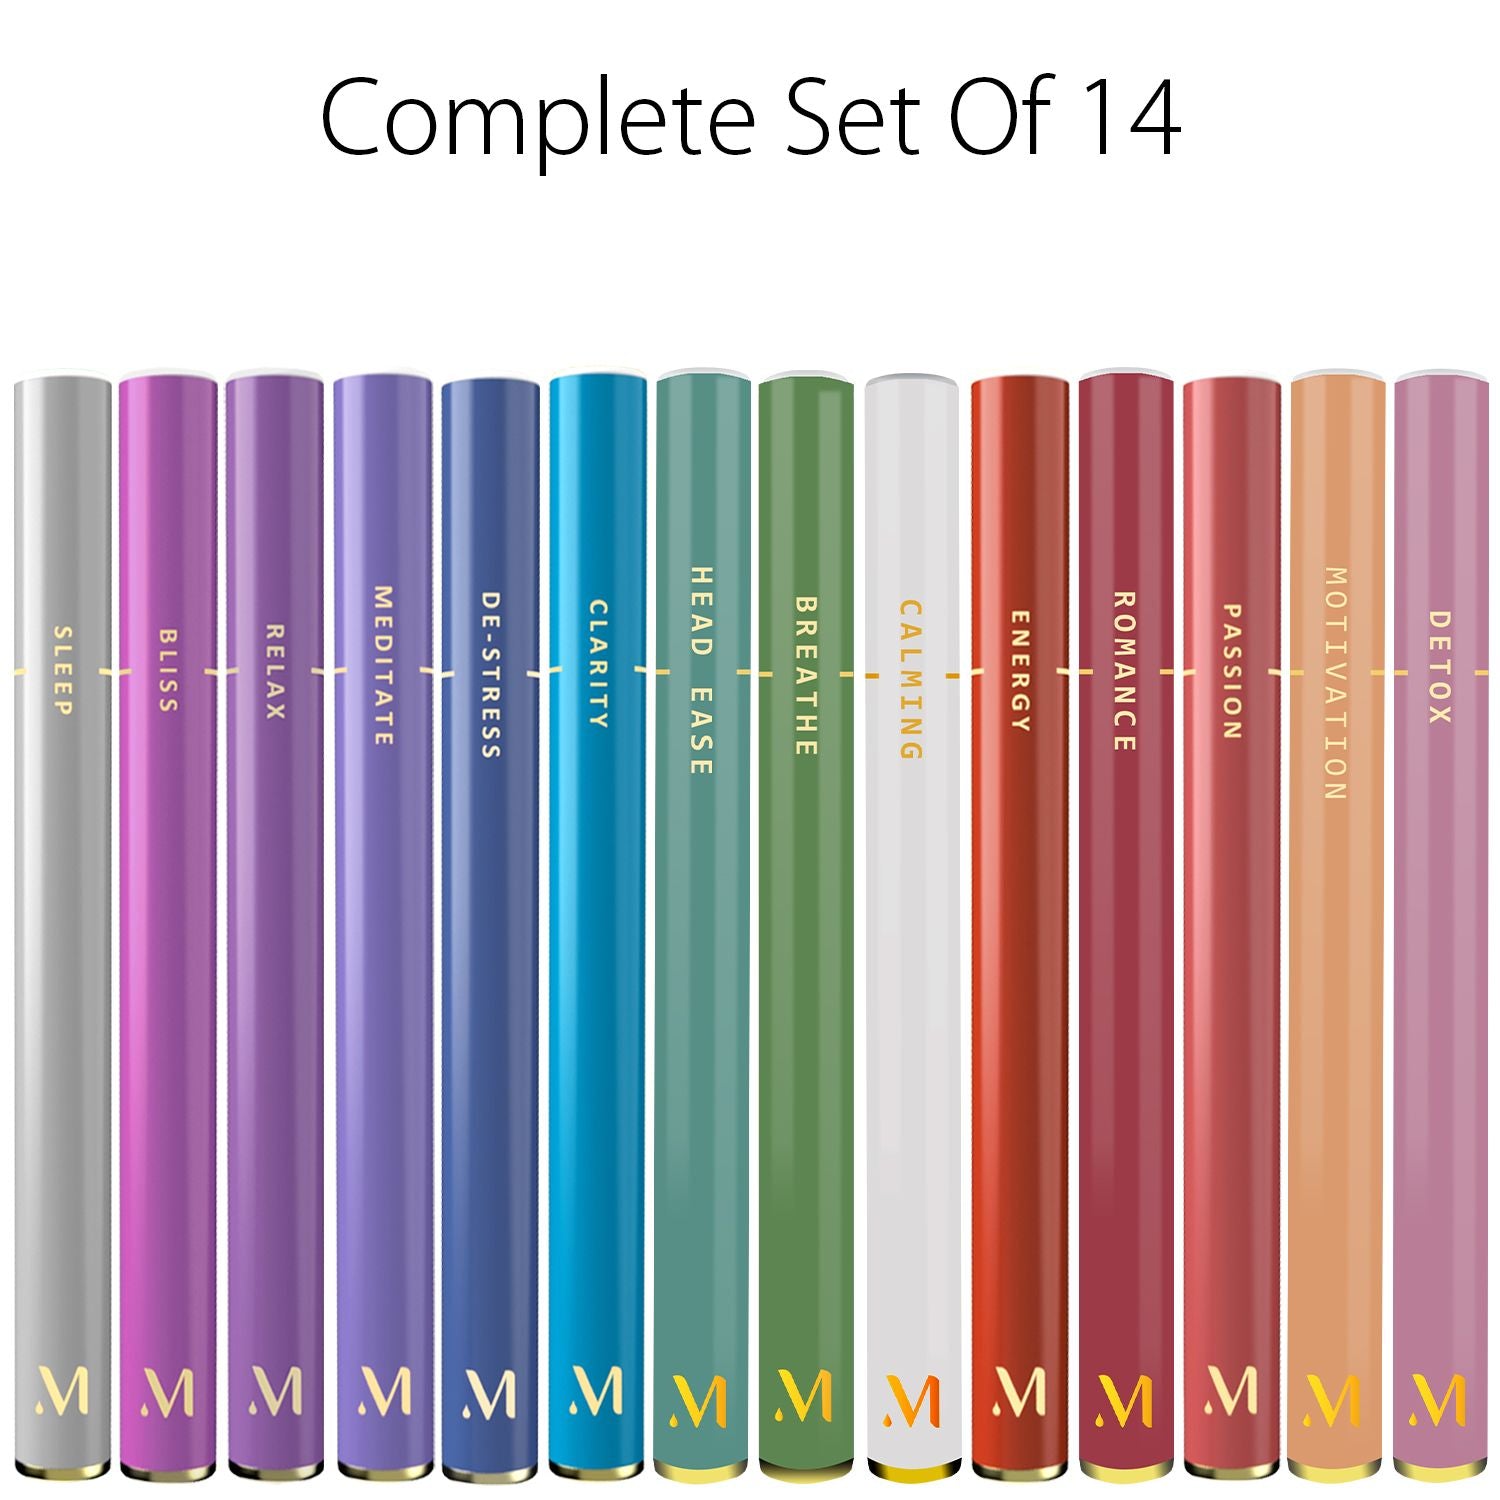 Complete Set of 14